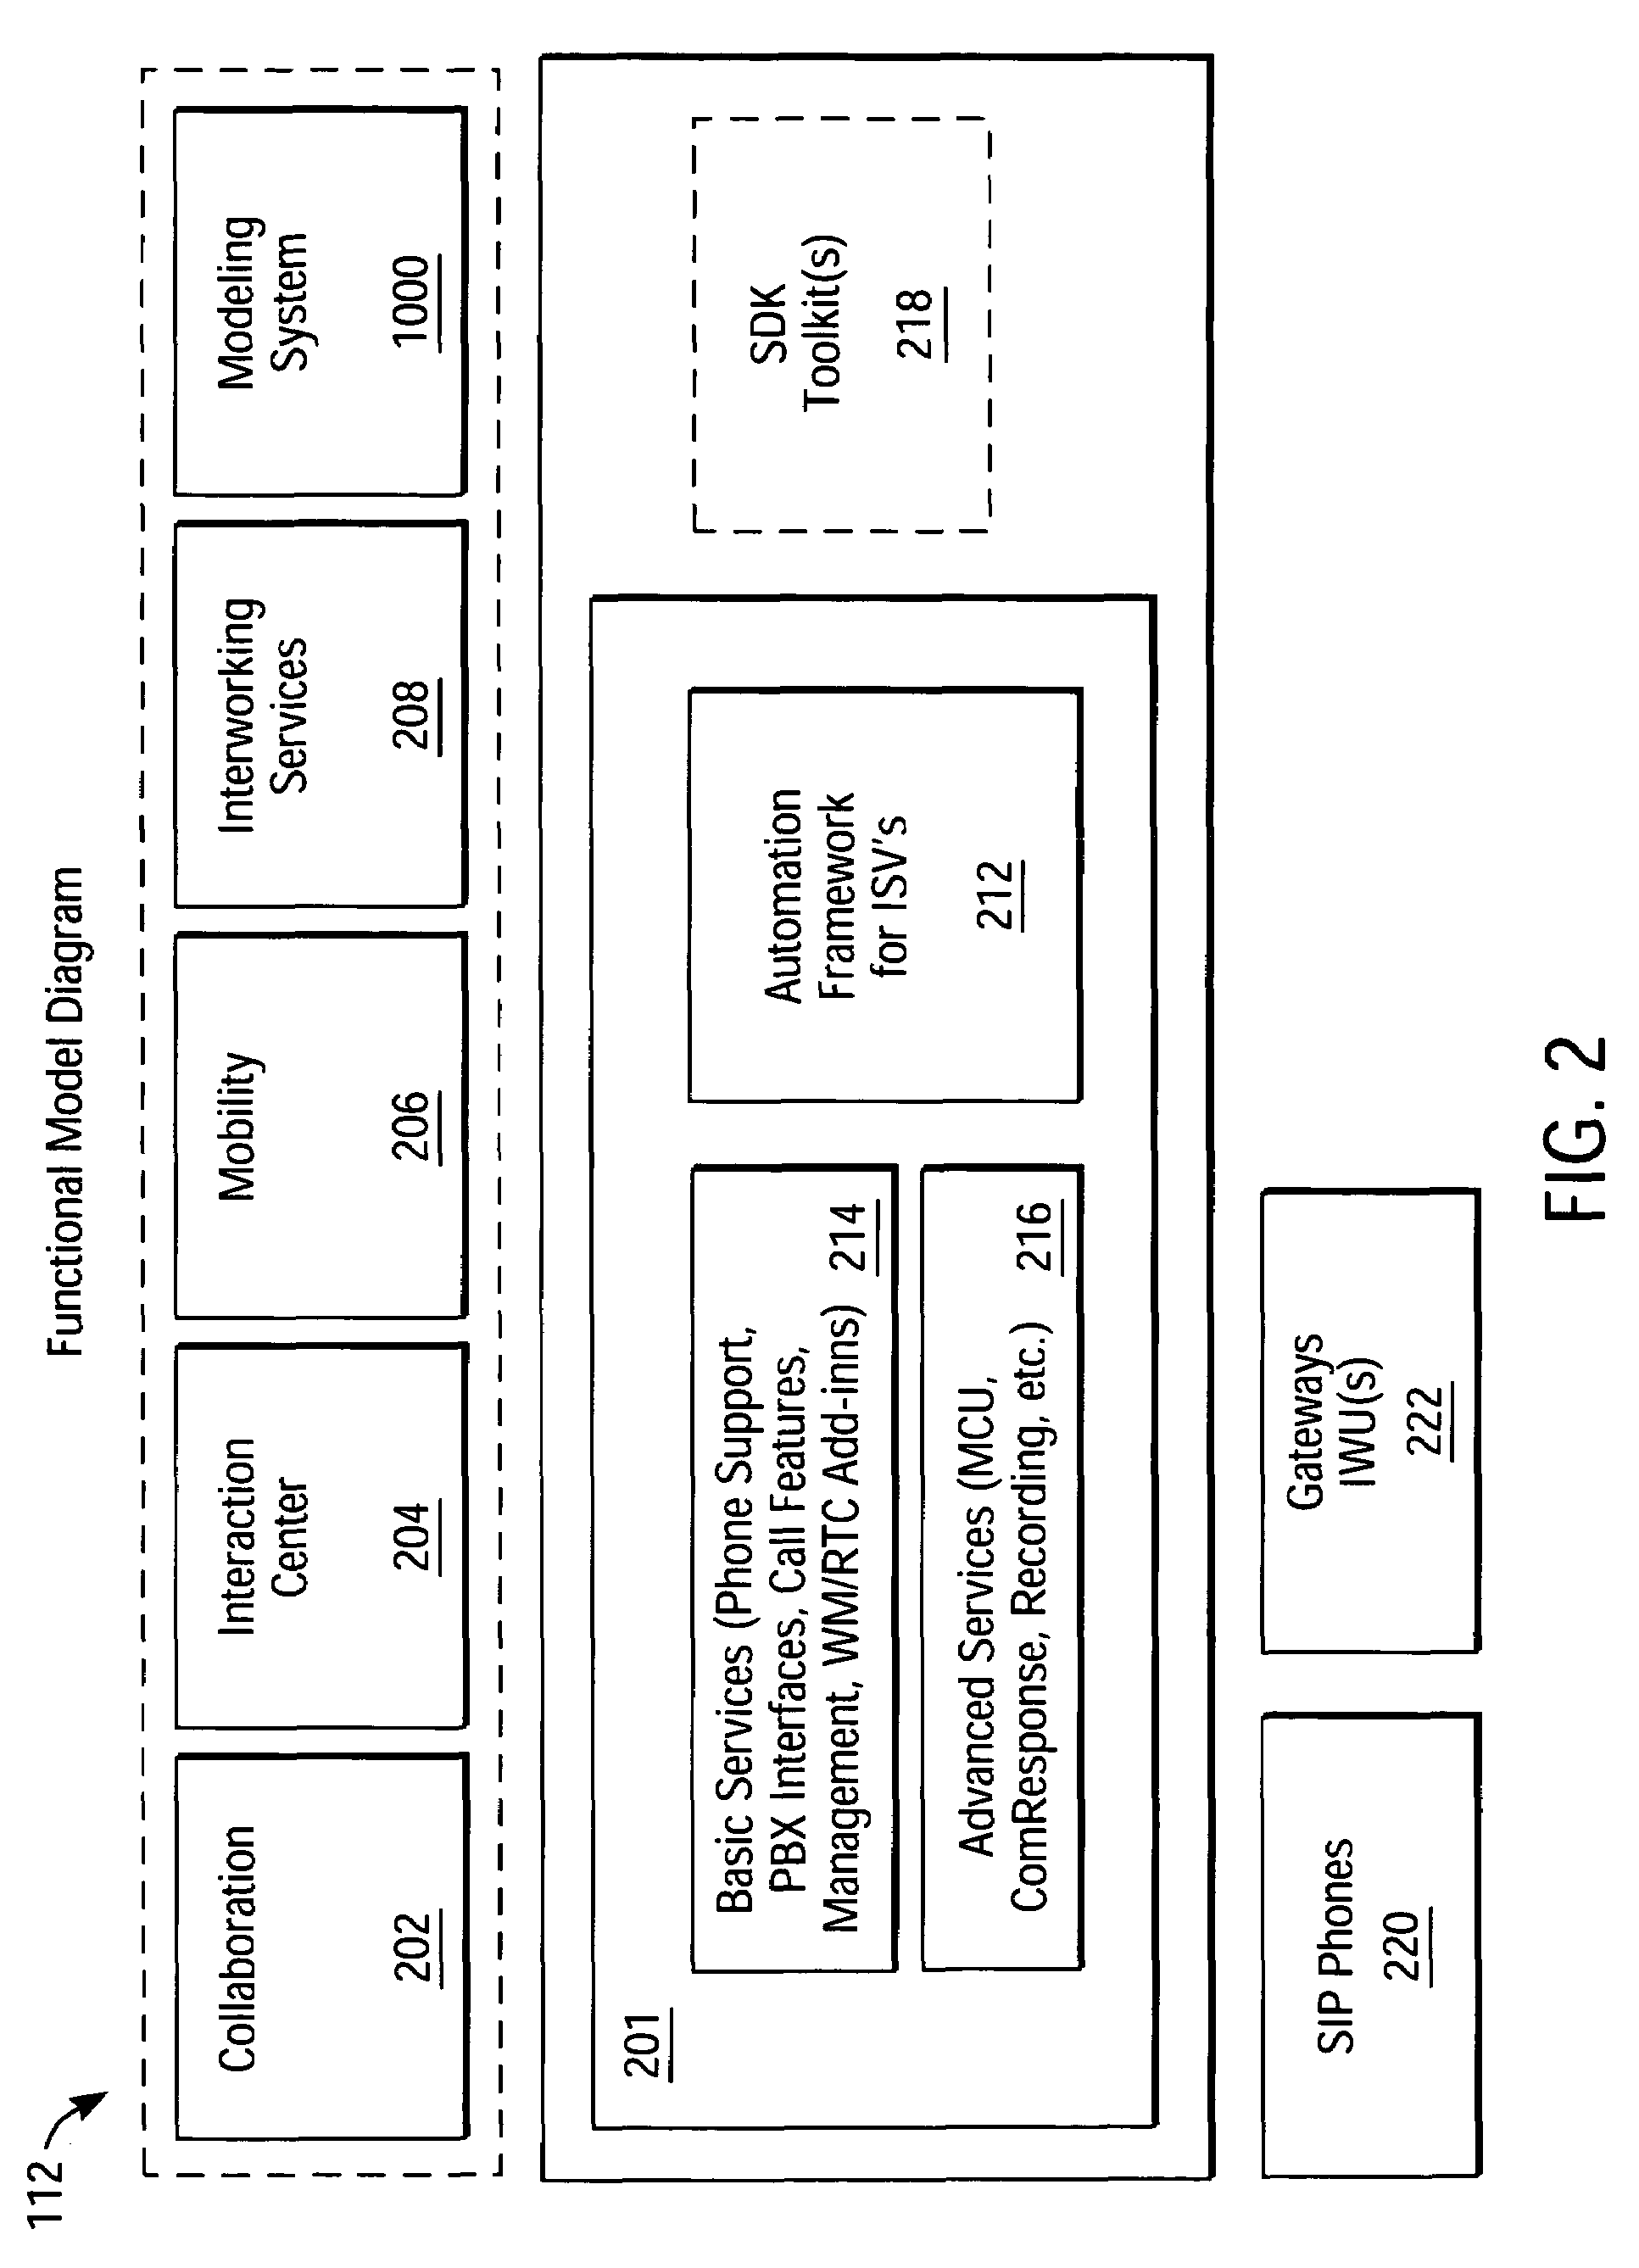 System and method for distributed modeling of real time systems